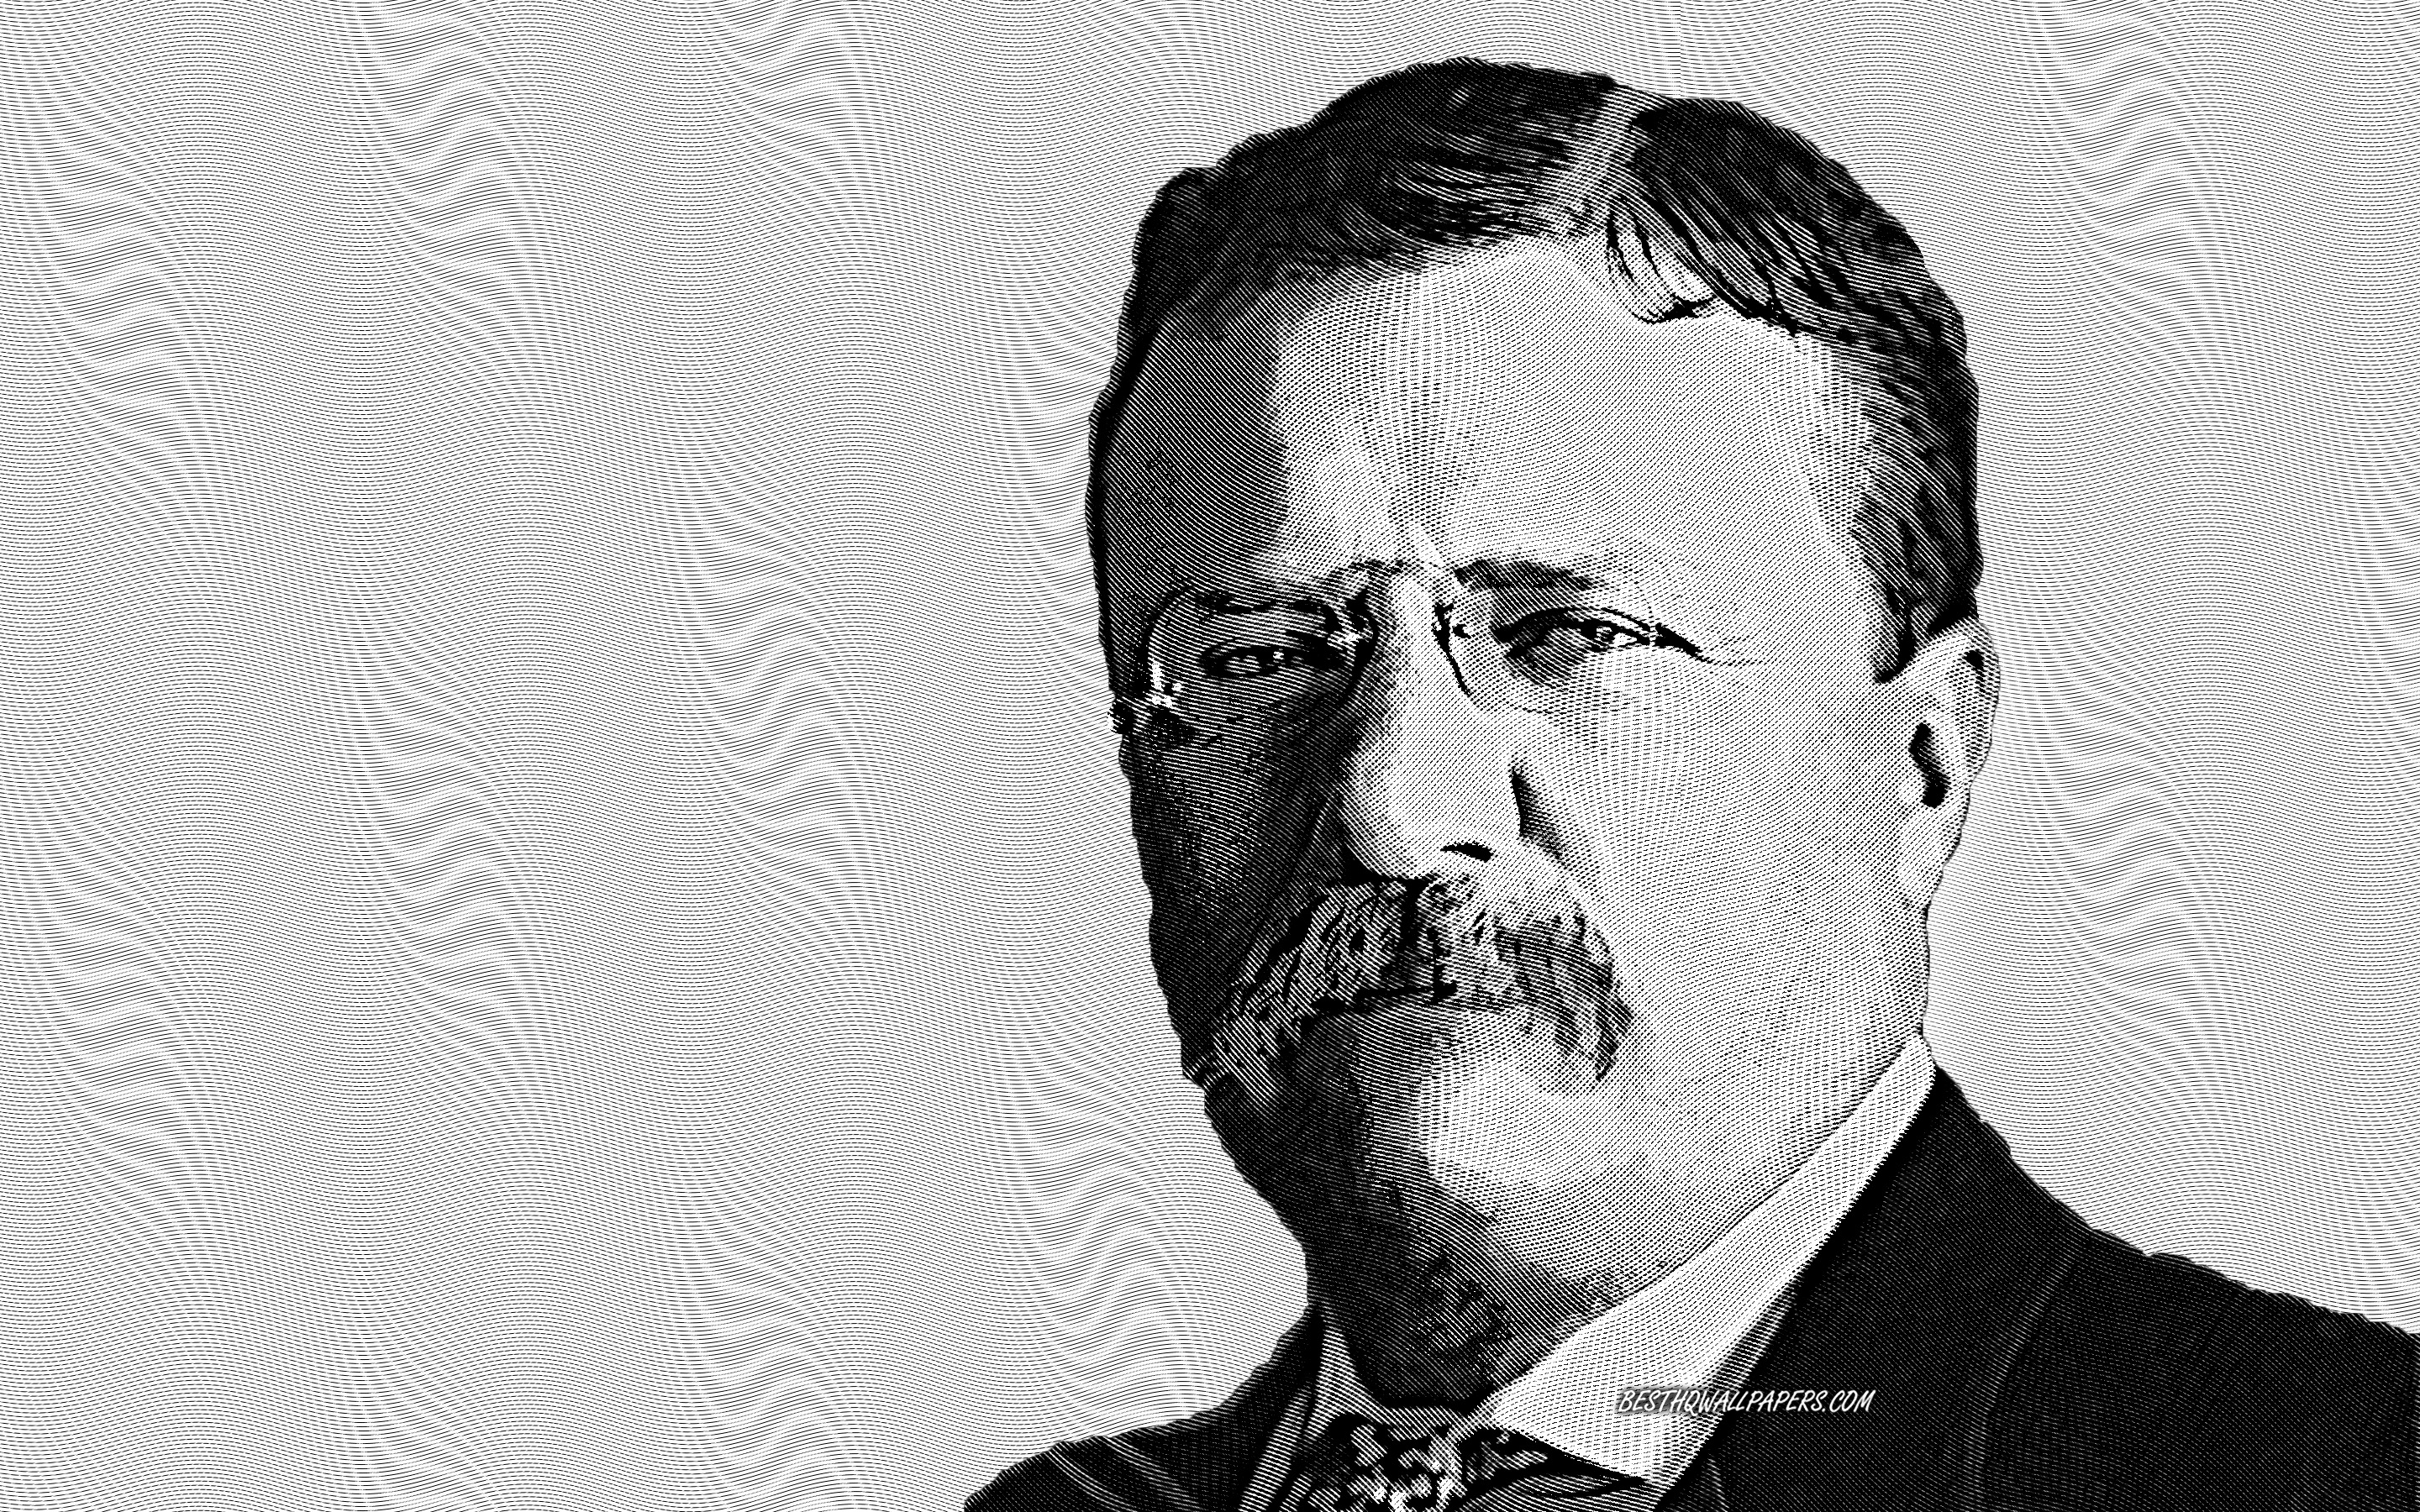 Download wallpaper Theodore Roosevelt, 26th US President, portrait, art, American president, USA for desktop with resolution 2880x1800. High Quality HD picture wallpaper